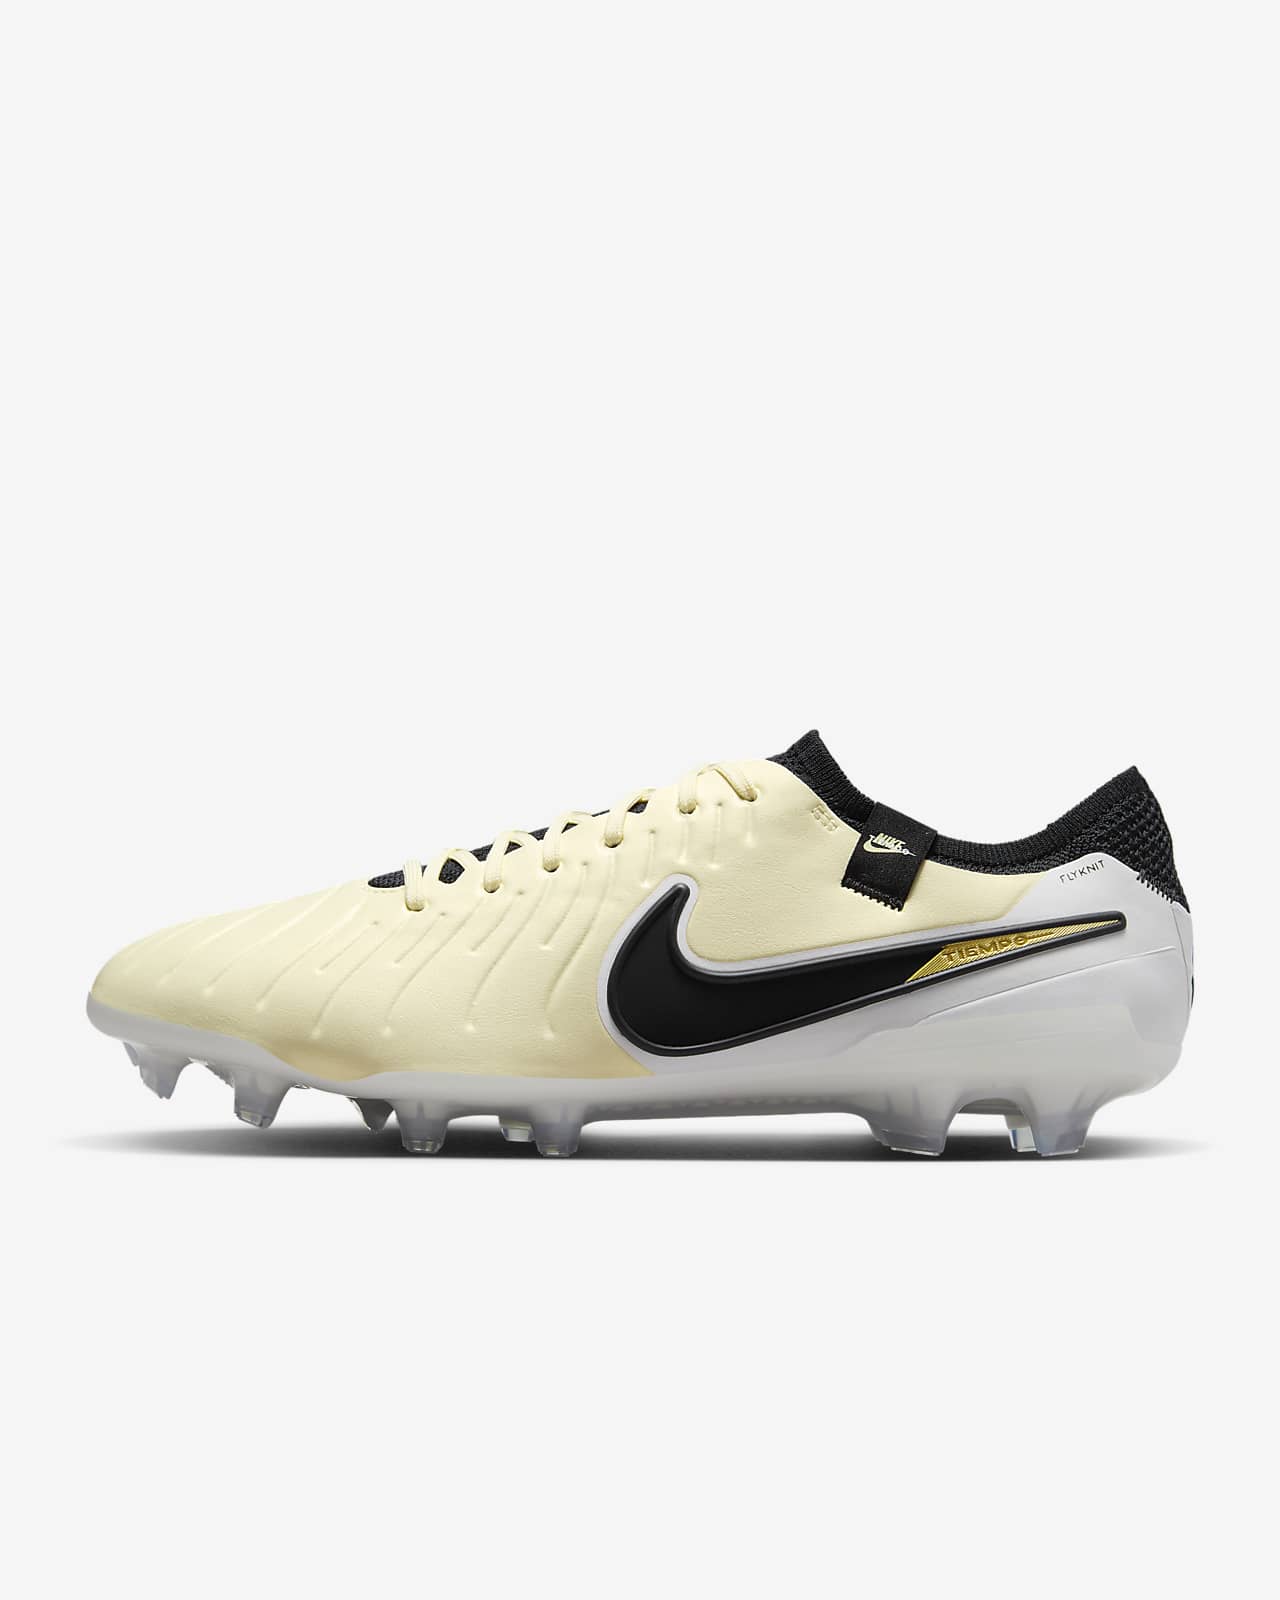 Nike Tiempo Legend 10 Elite Firm-Ground Low-Top Football Boot